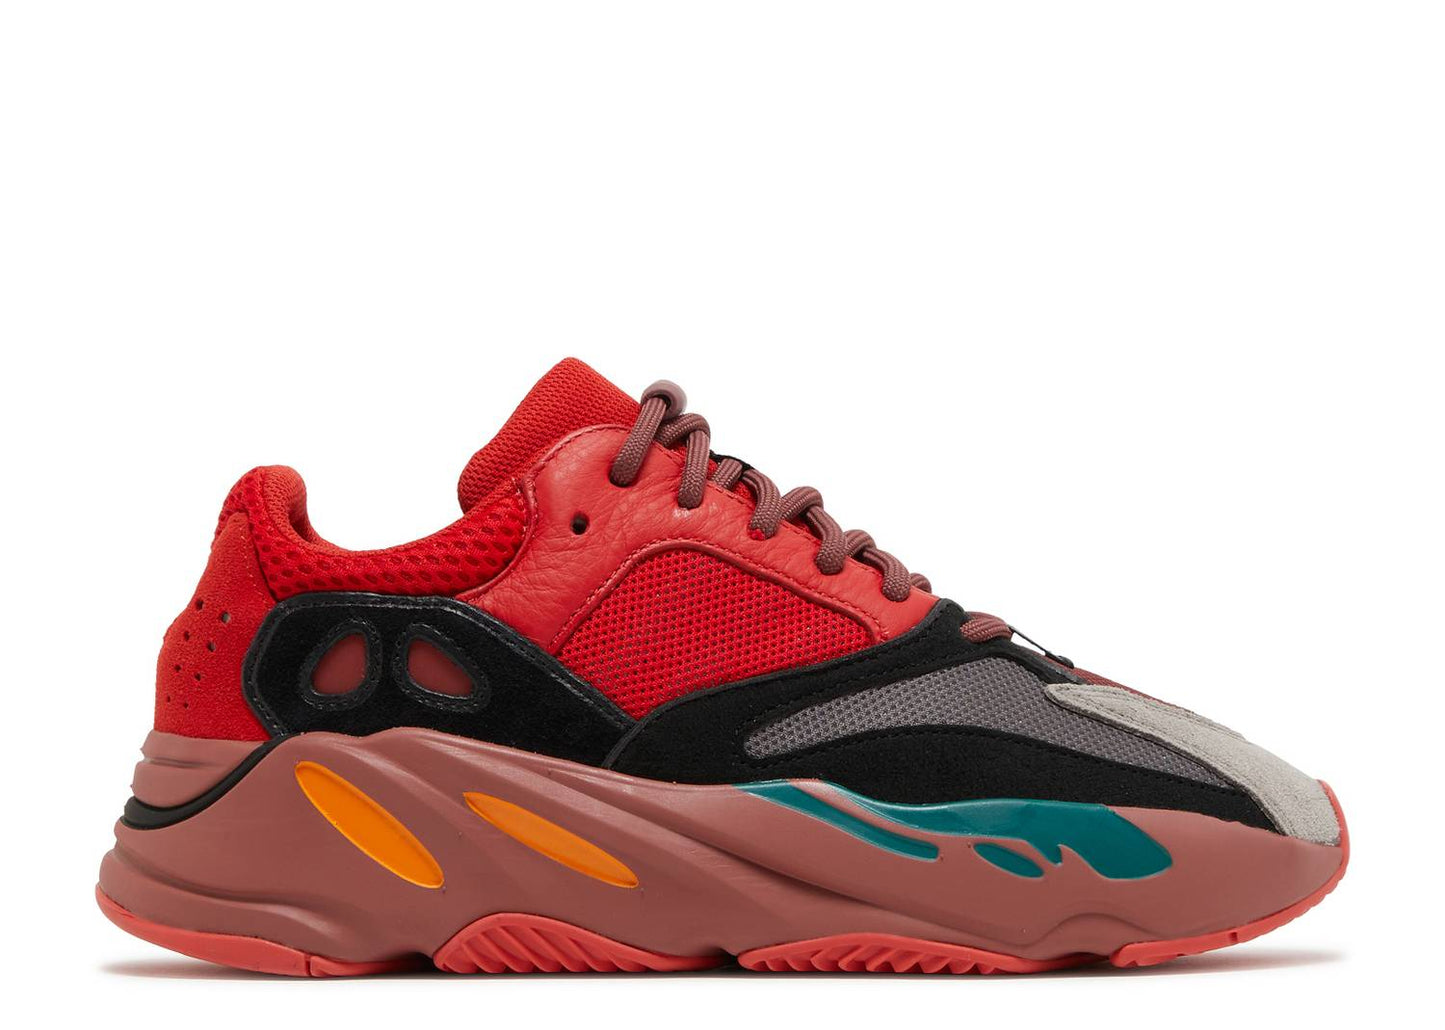 Adidas Yeezy Boost 700 “Hi-Res Red”